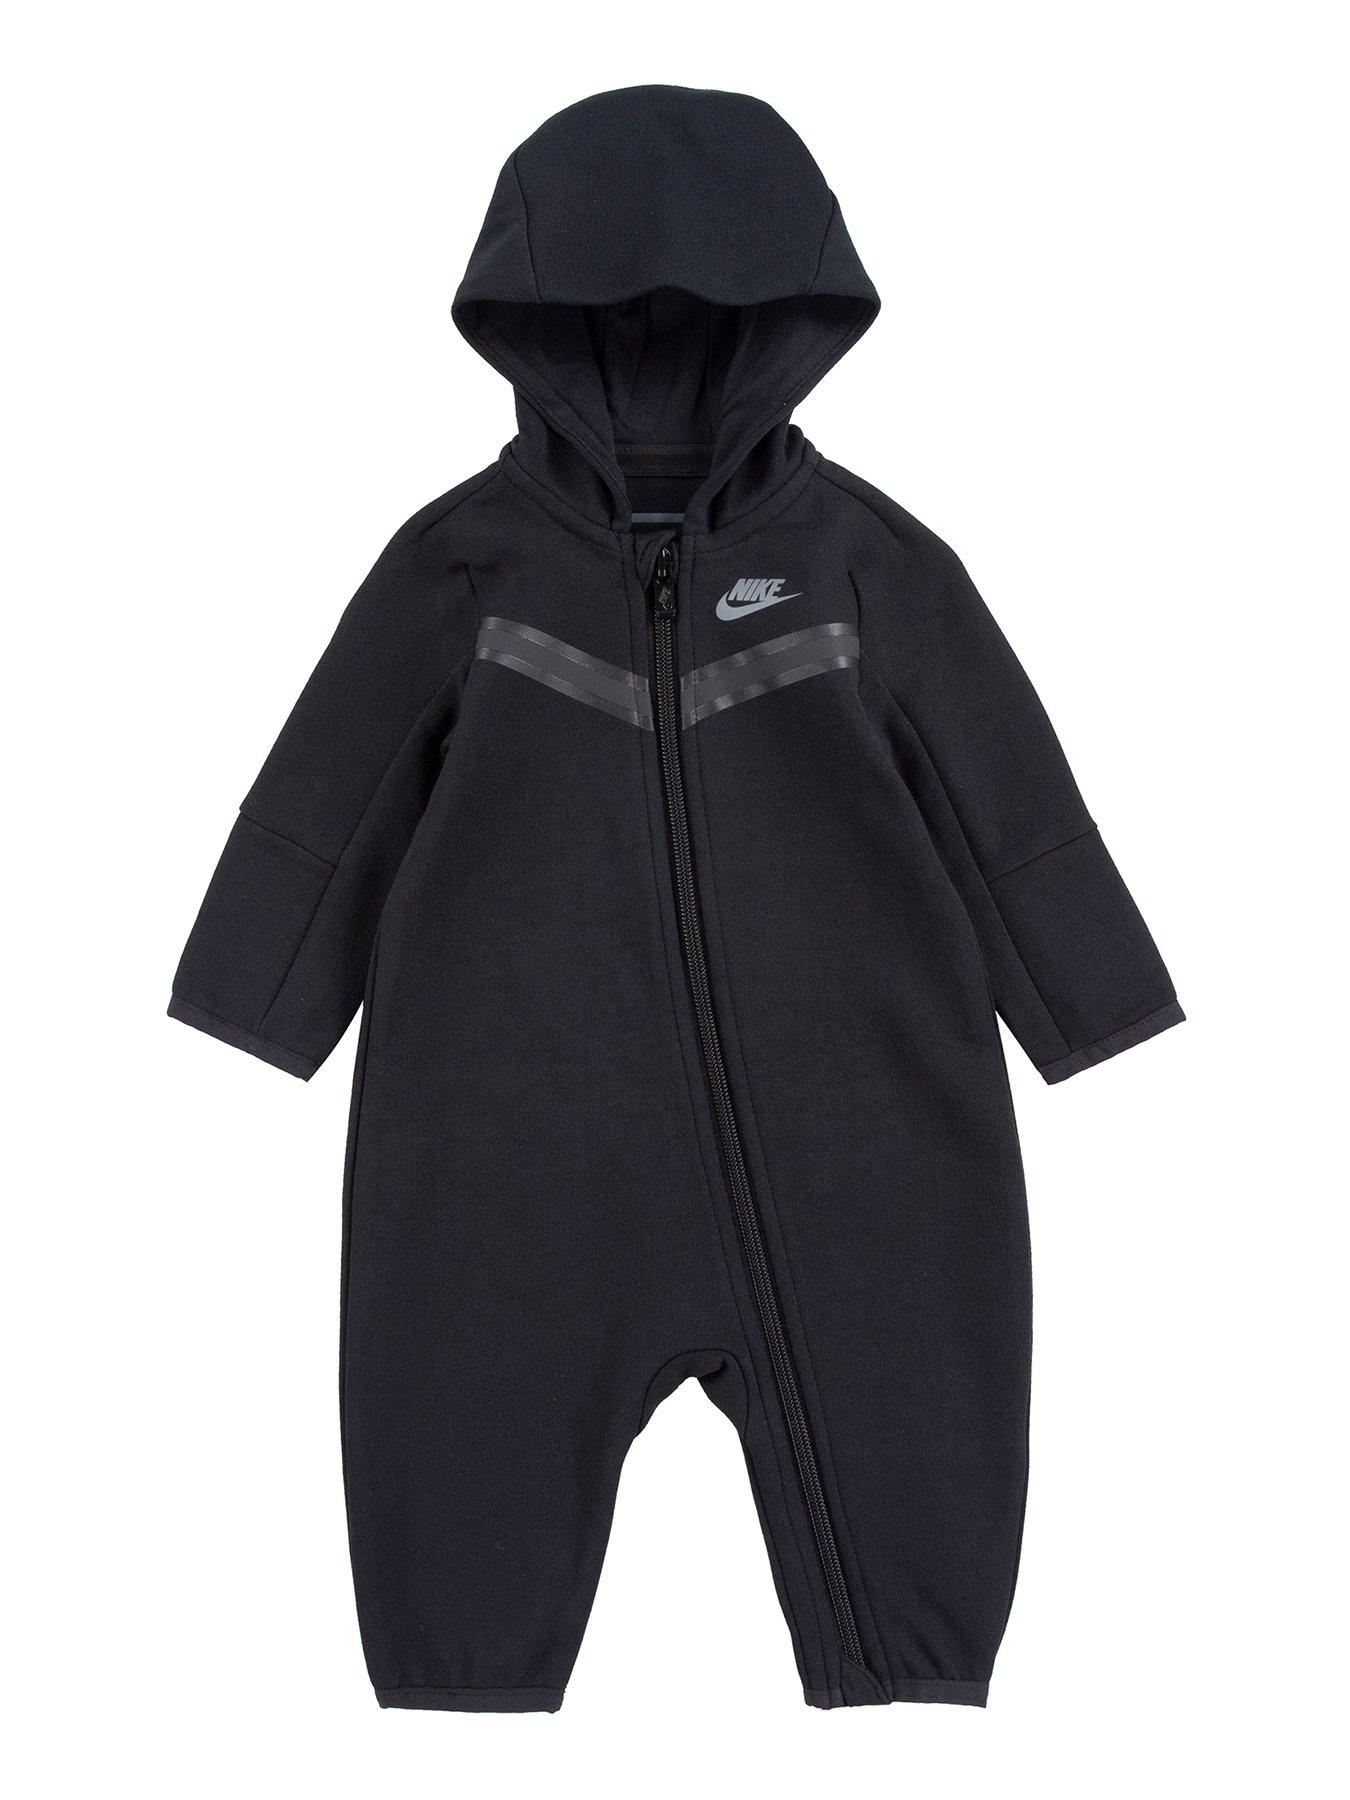 Kids Younger Nsw Tech Fleece Coverall